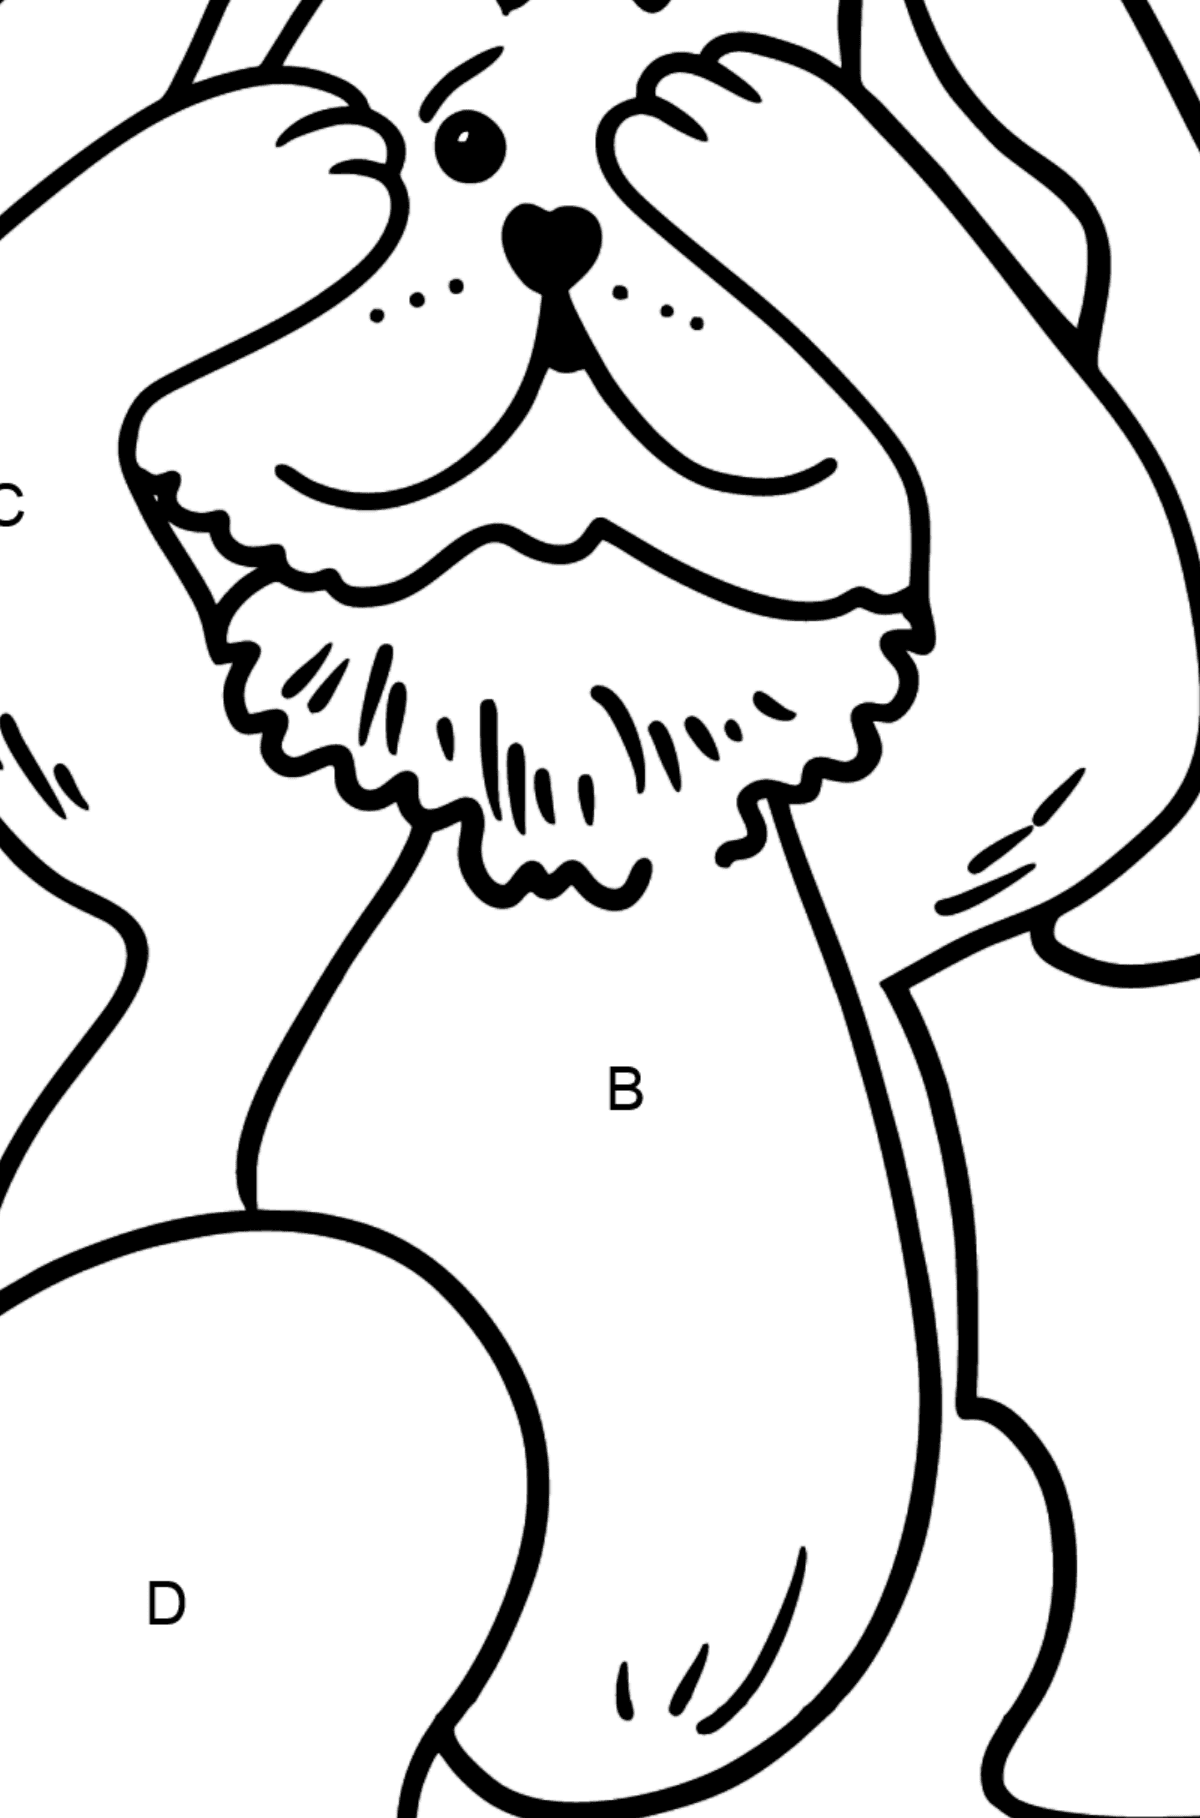 Scared Bunny coloring page - Coloring by Letters for Kids